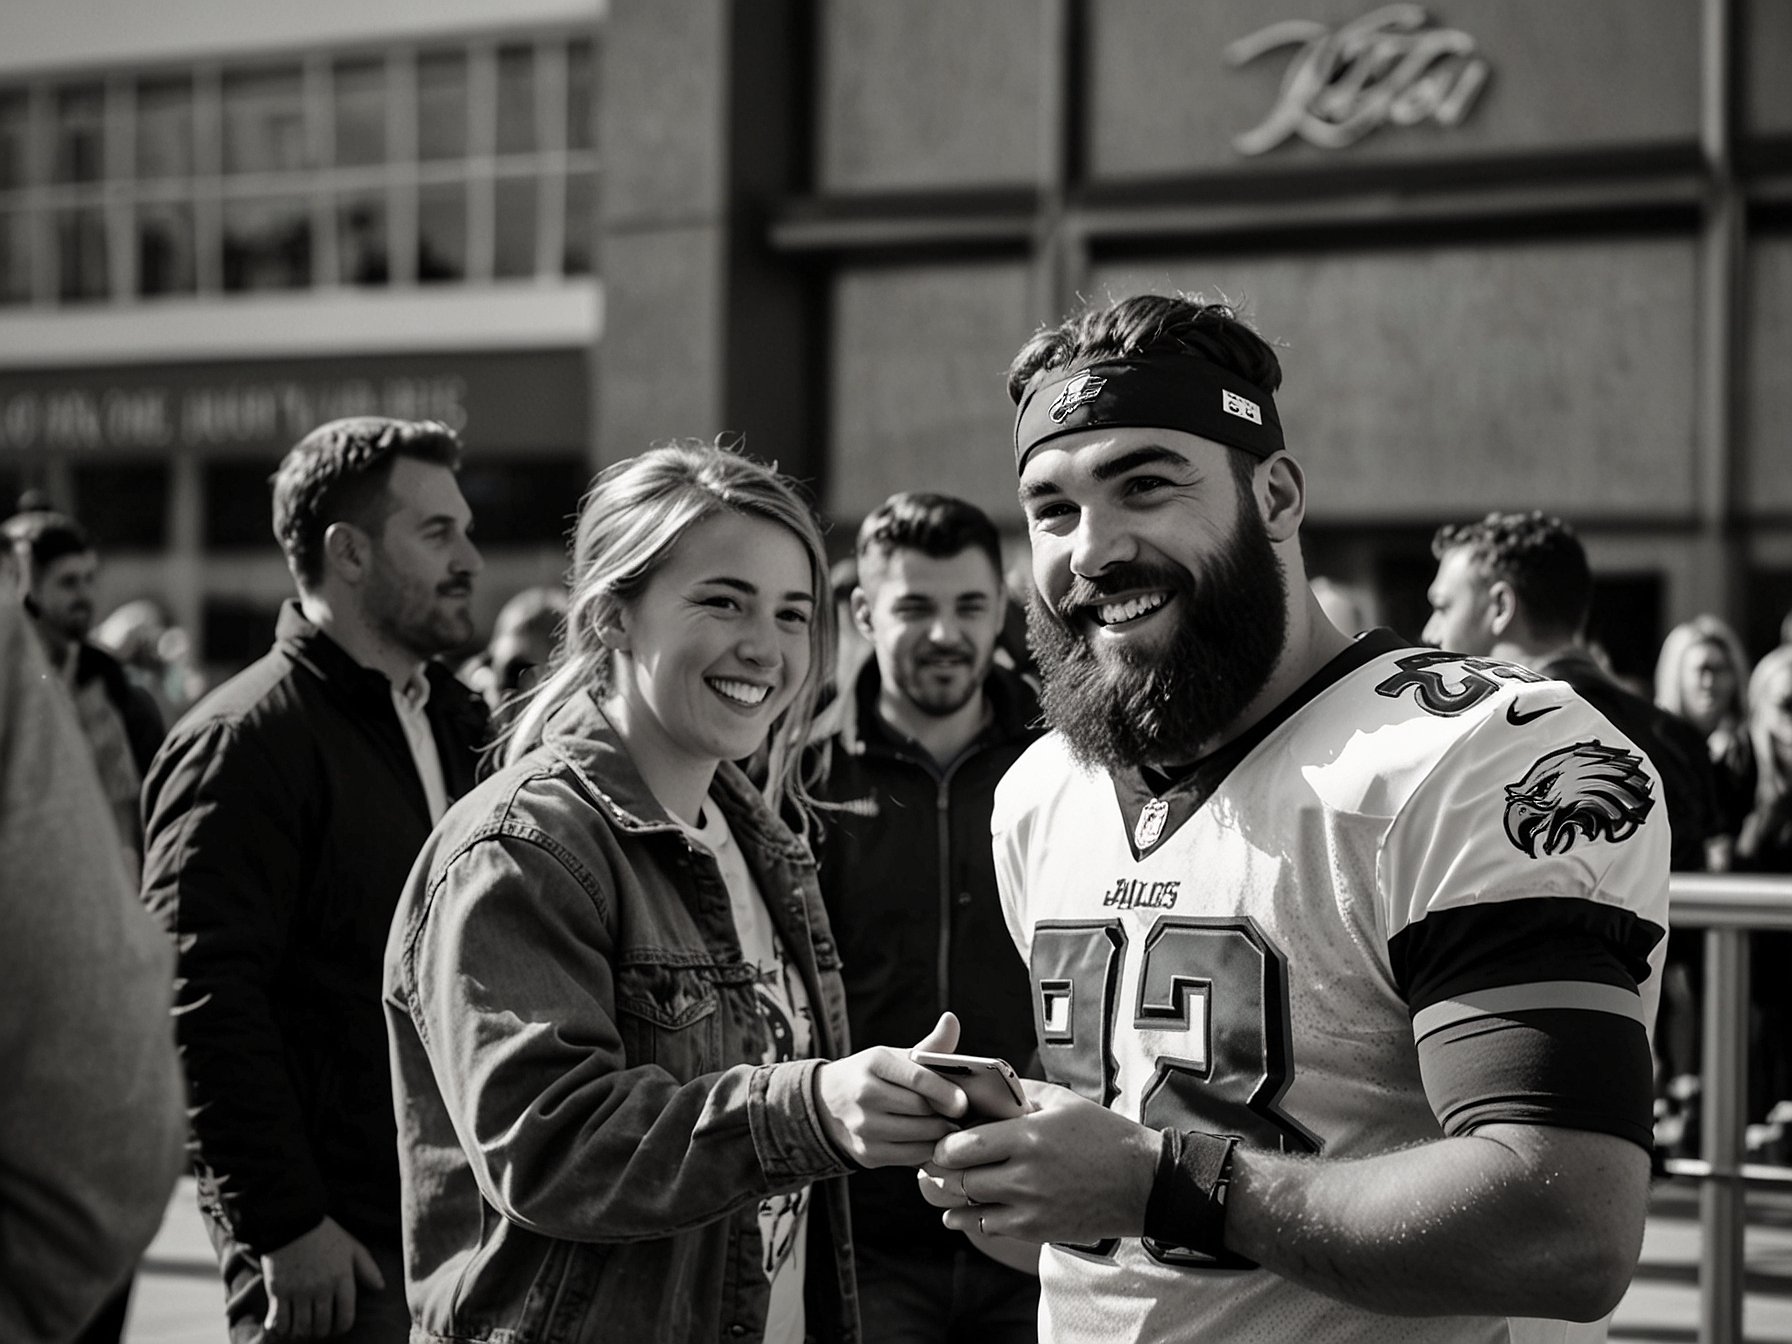 The young Eagles fan, eyes wide with excitement, meets Jason Kelce outside the O2 Arena. Kelce, smiling warmly, is signing the boy's jersey, surrounded by onlookers capturing the moment on their phones.